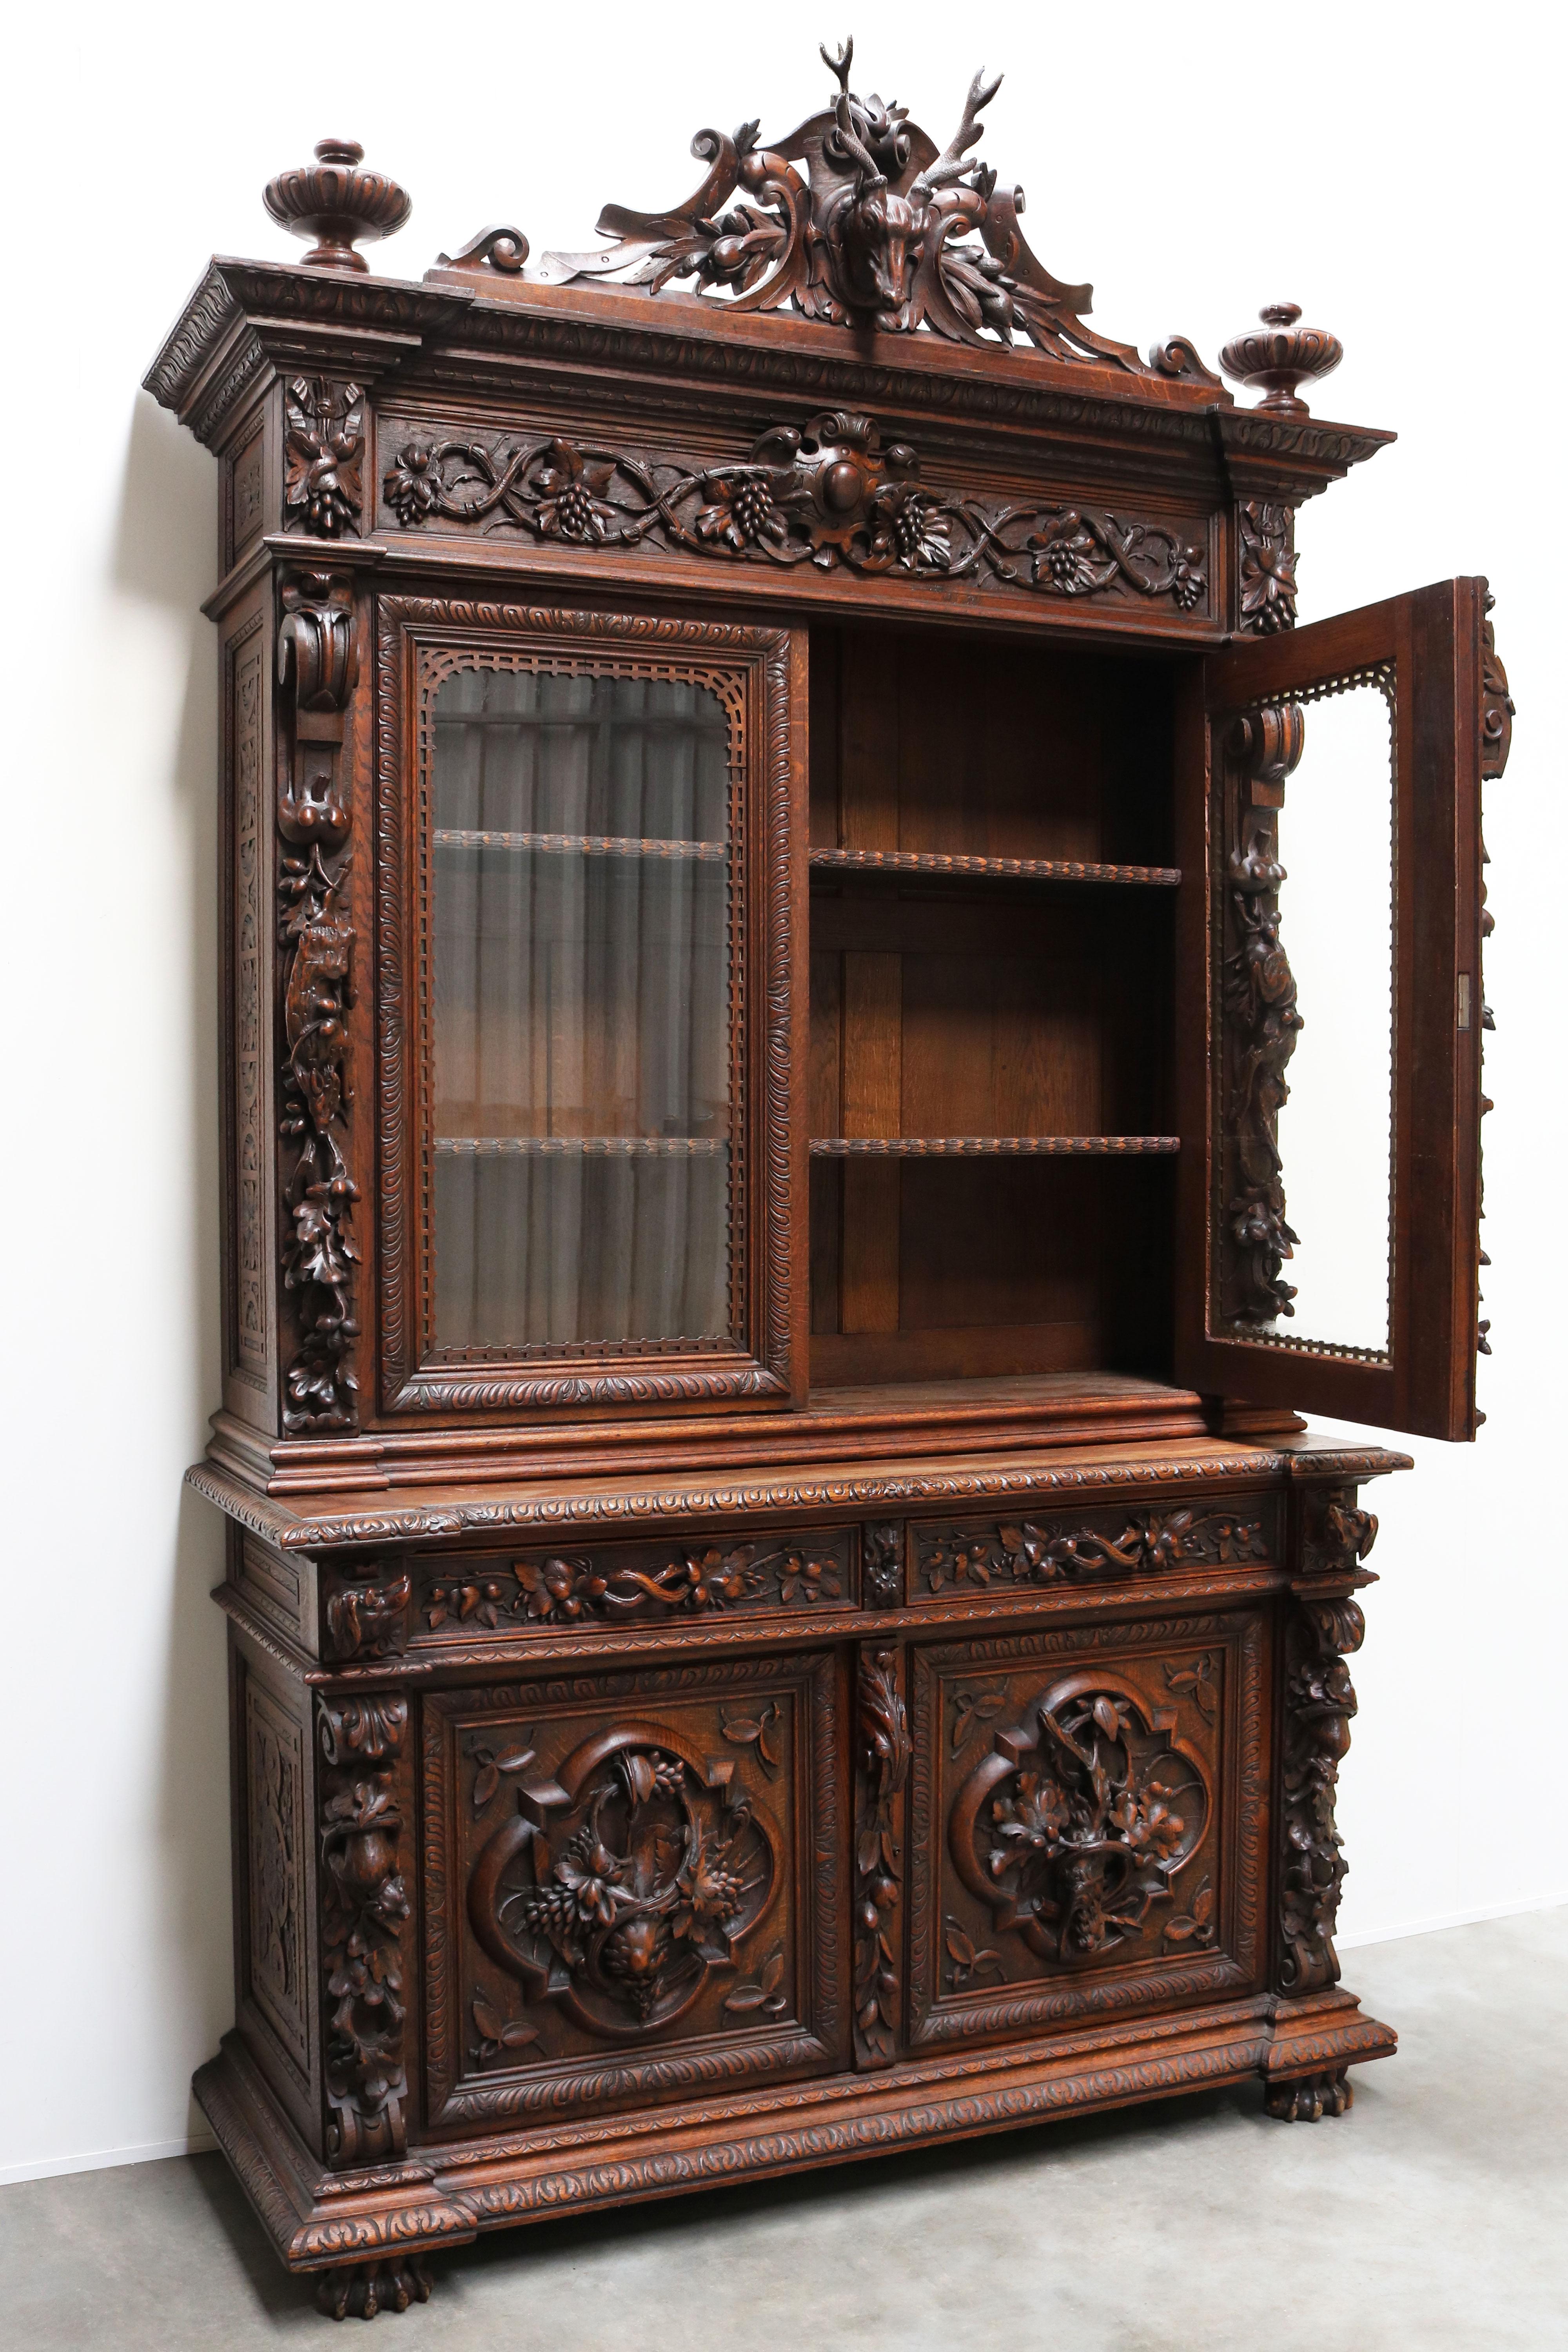 Exquisite & Breathtaking! This rare monumental 19th century French hunt style / renaissance revival Cabinet of exceptional quality. 
The cabinet is richly decorated with French hunt / Black Forest style carvings of numerous animals & floral